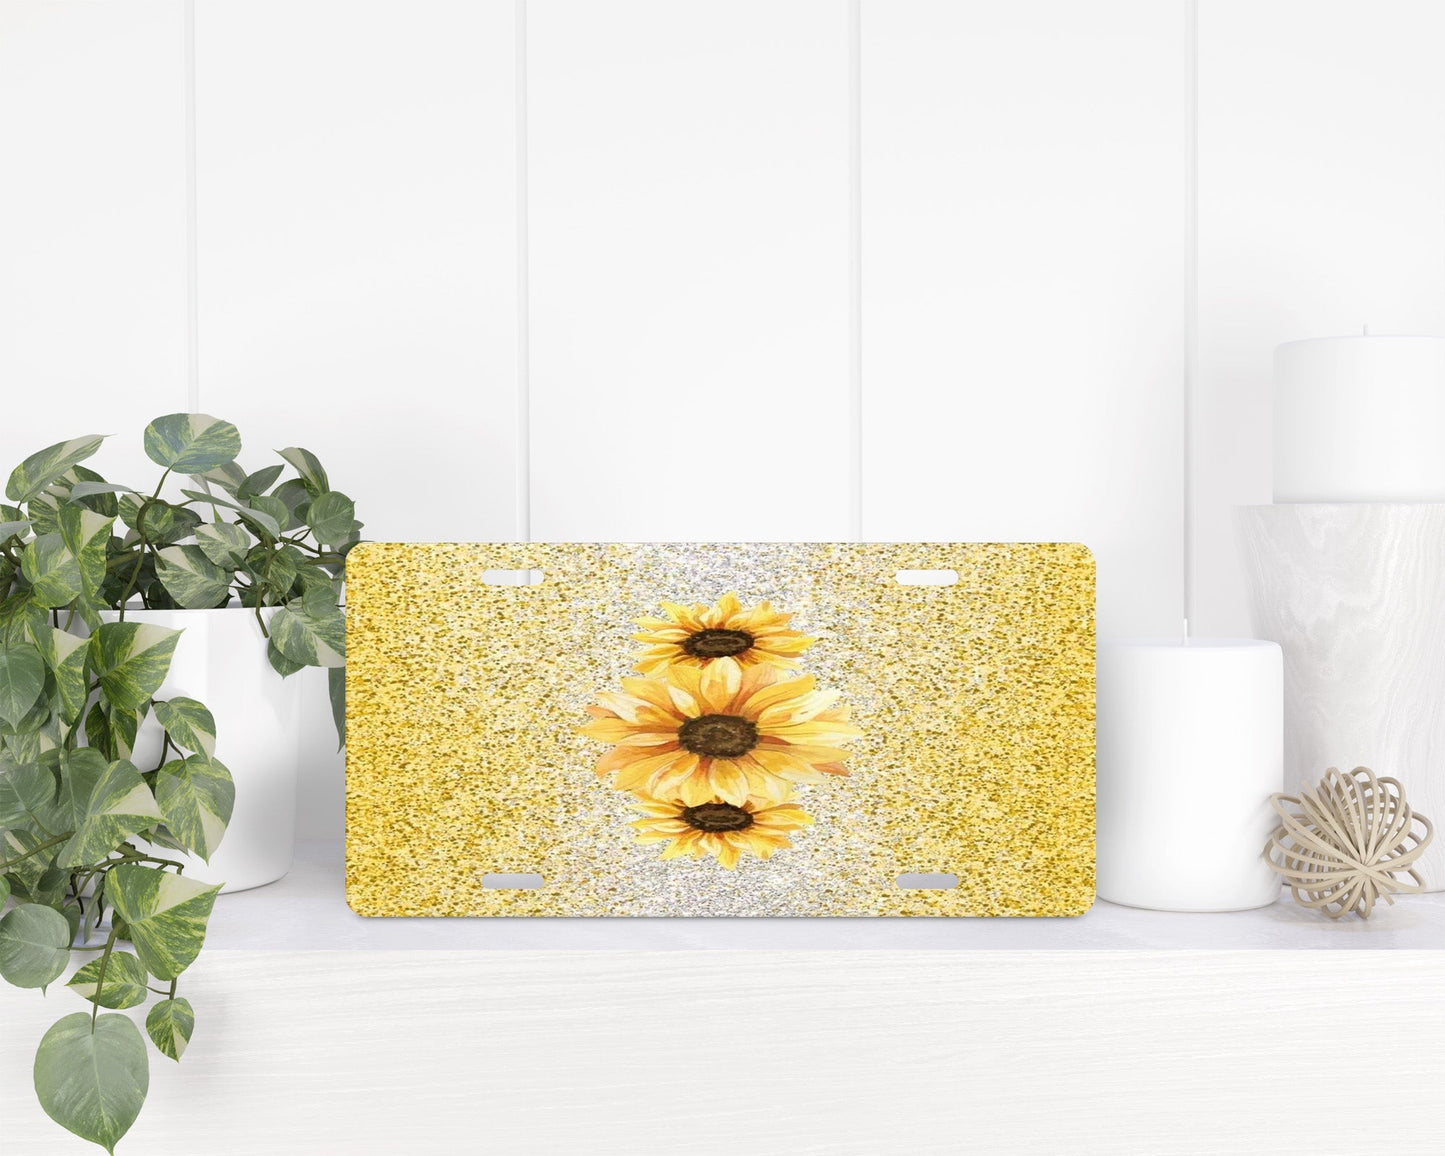 Sunflowers|License Plate - Vehicle License Plates